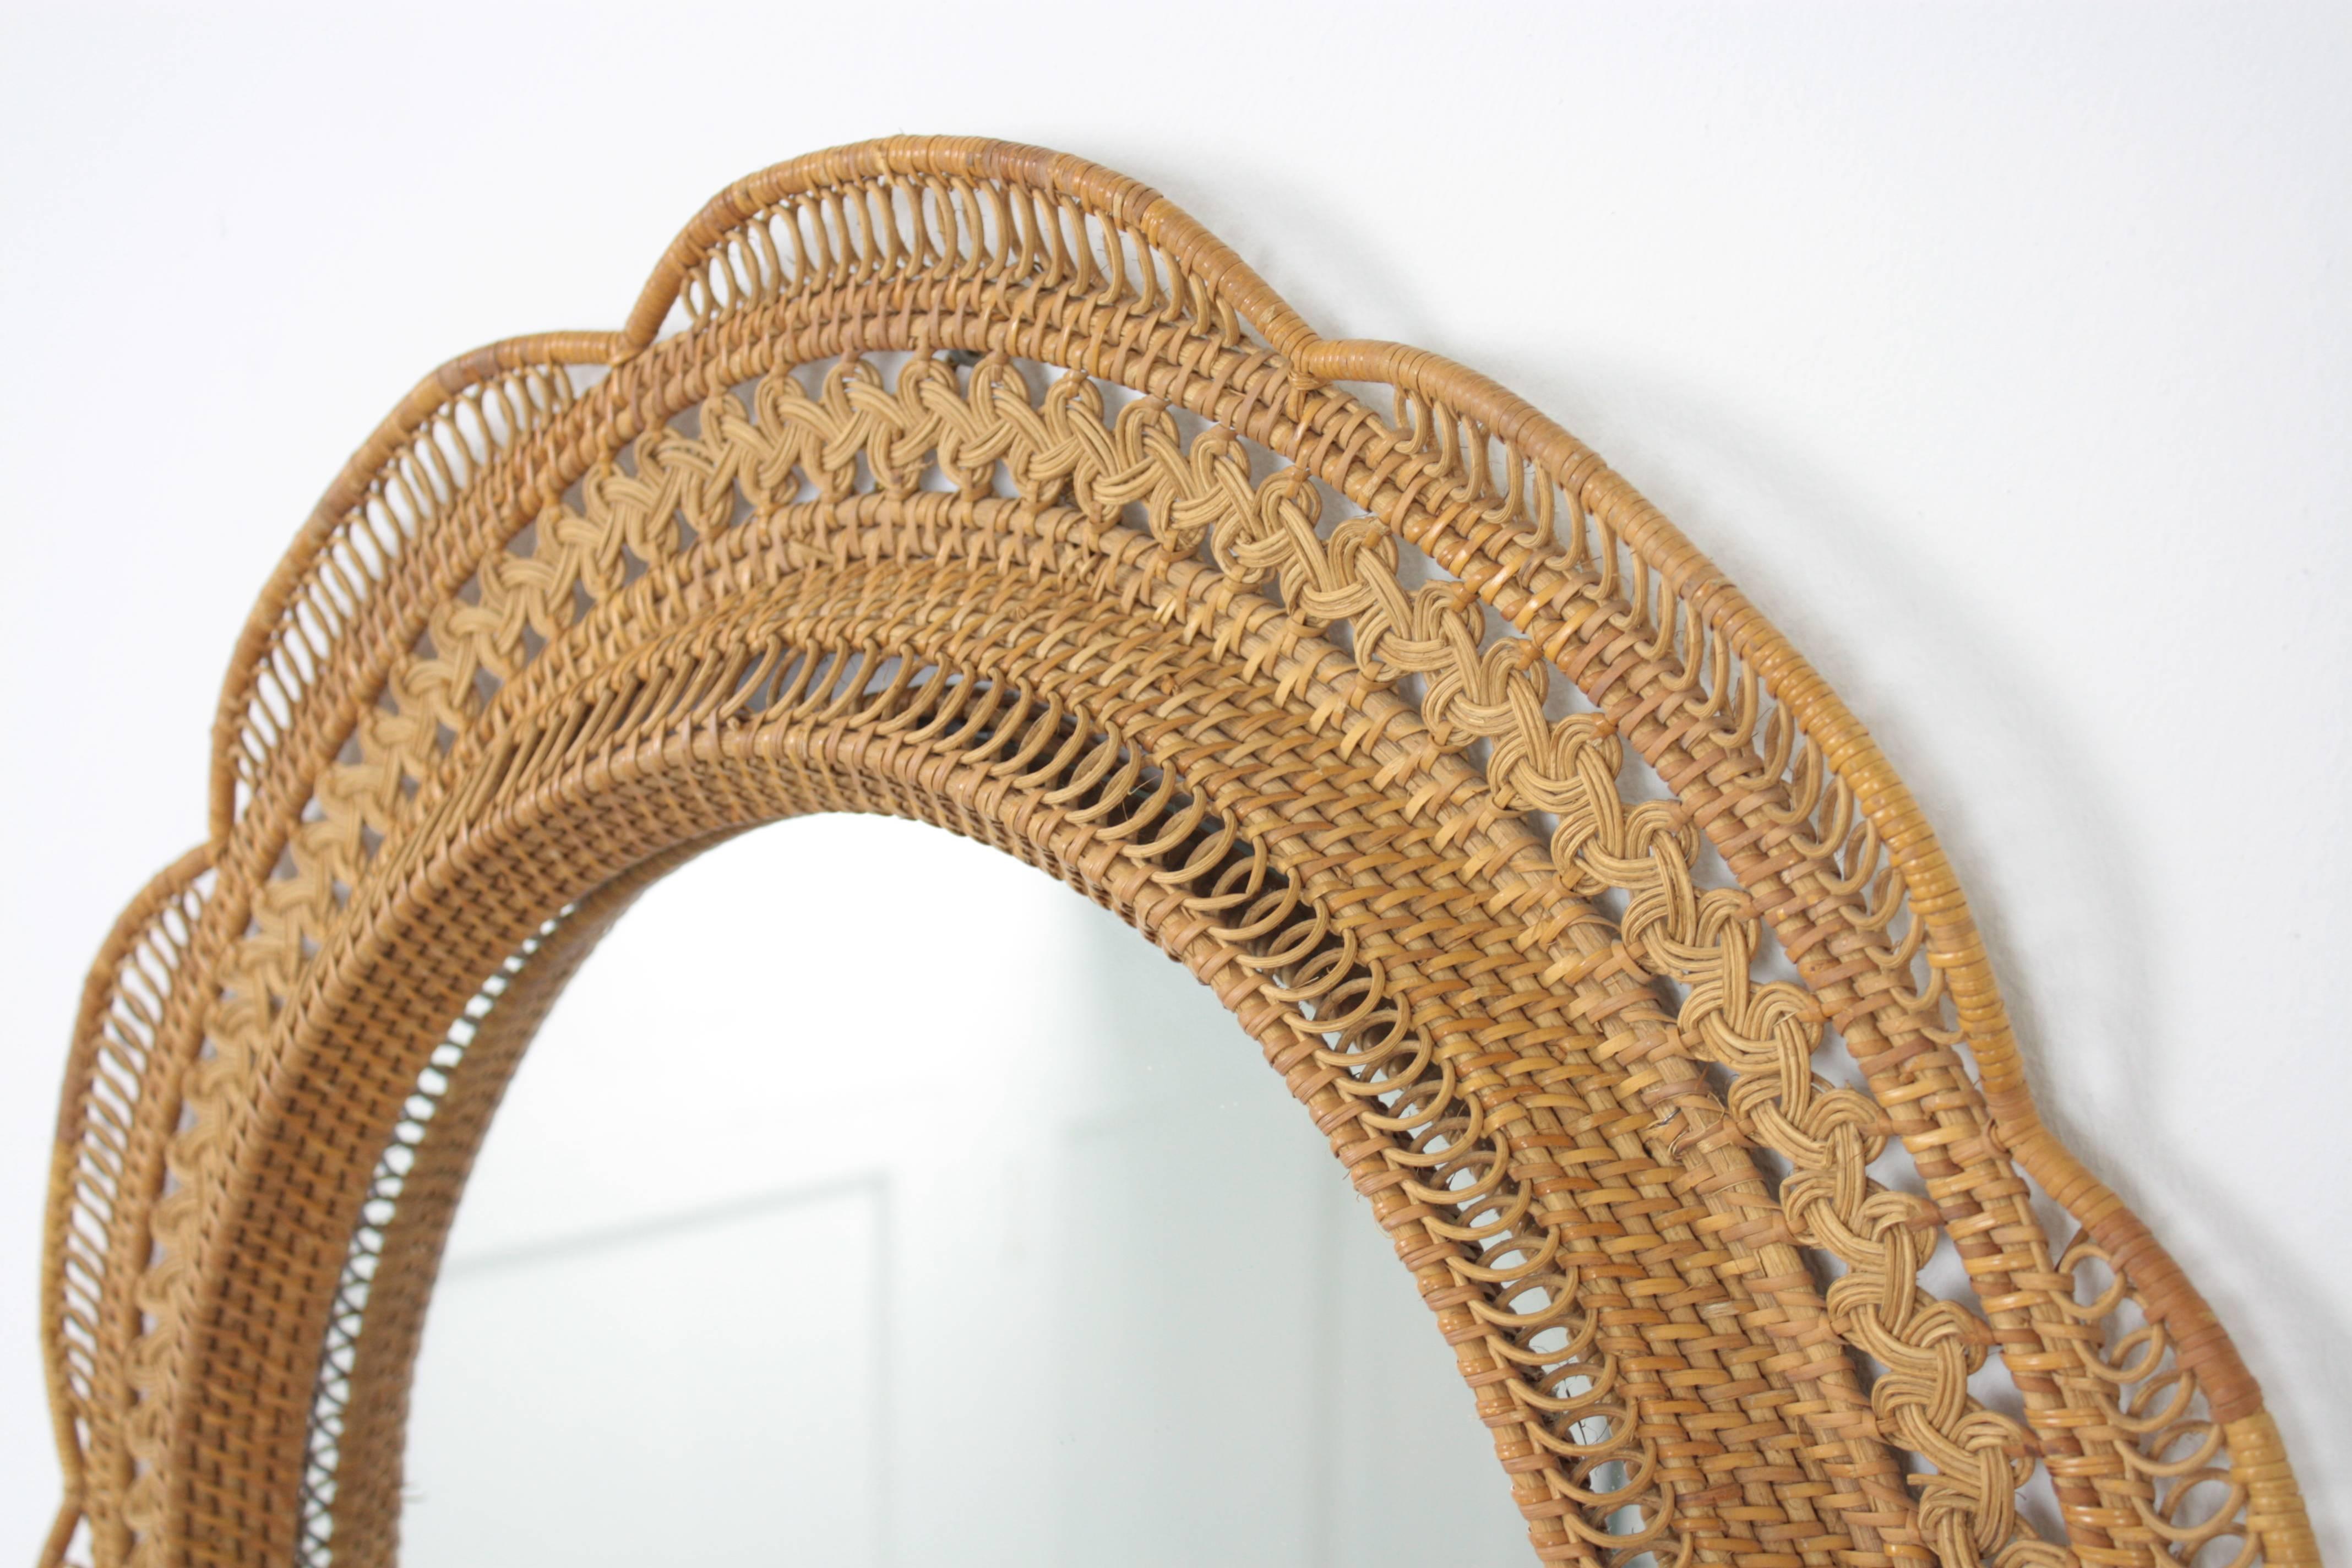 An spectacular wicker mirror handcrafted in Spain at the sixties. The flower burst frame shows an amazing wicker filigree work in an excellent vintage condition. A fresh an stylish piece to place alone or to mix with other mirrors in a wall